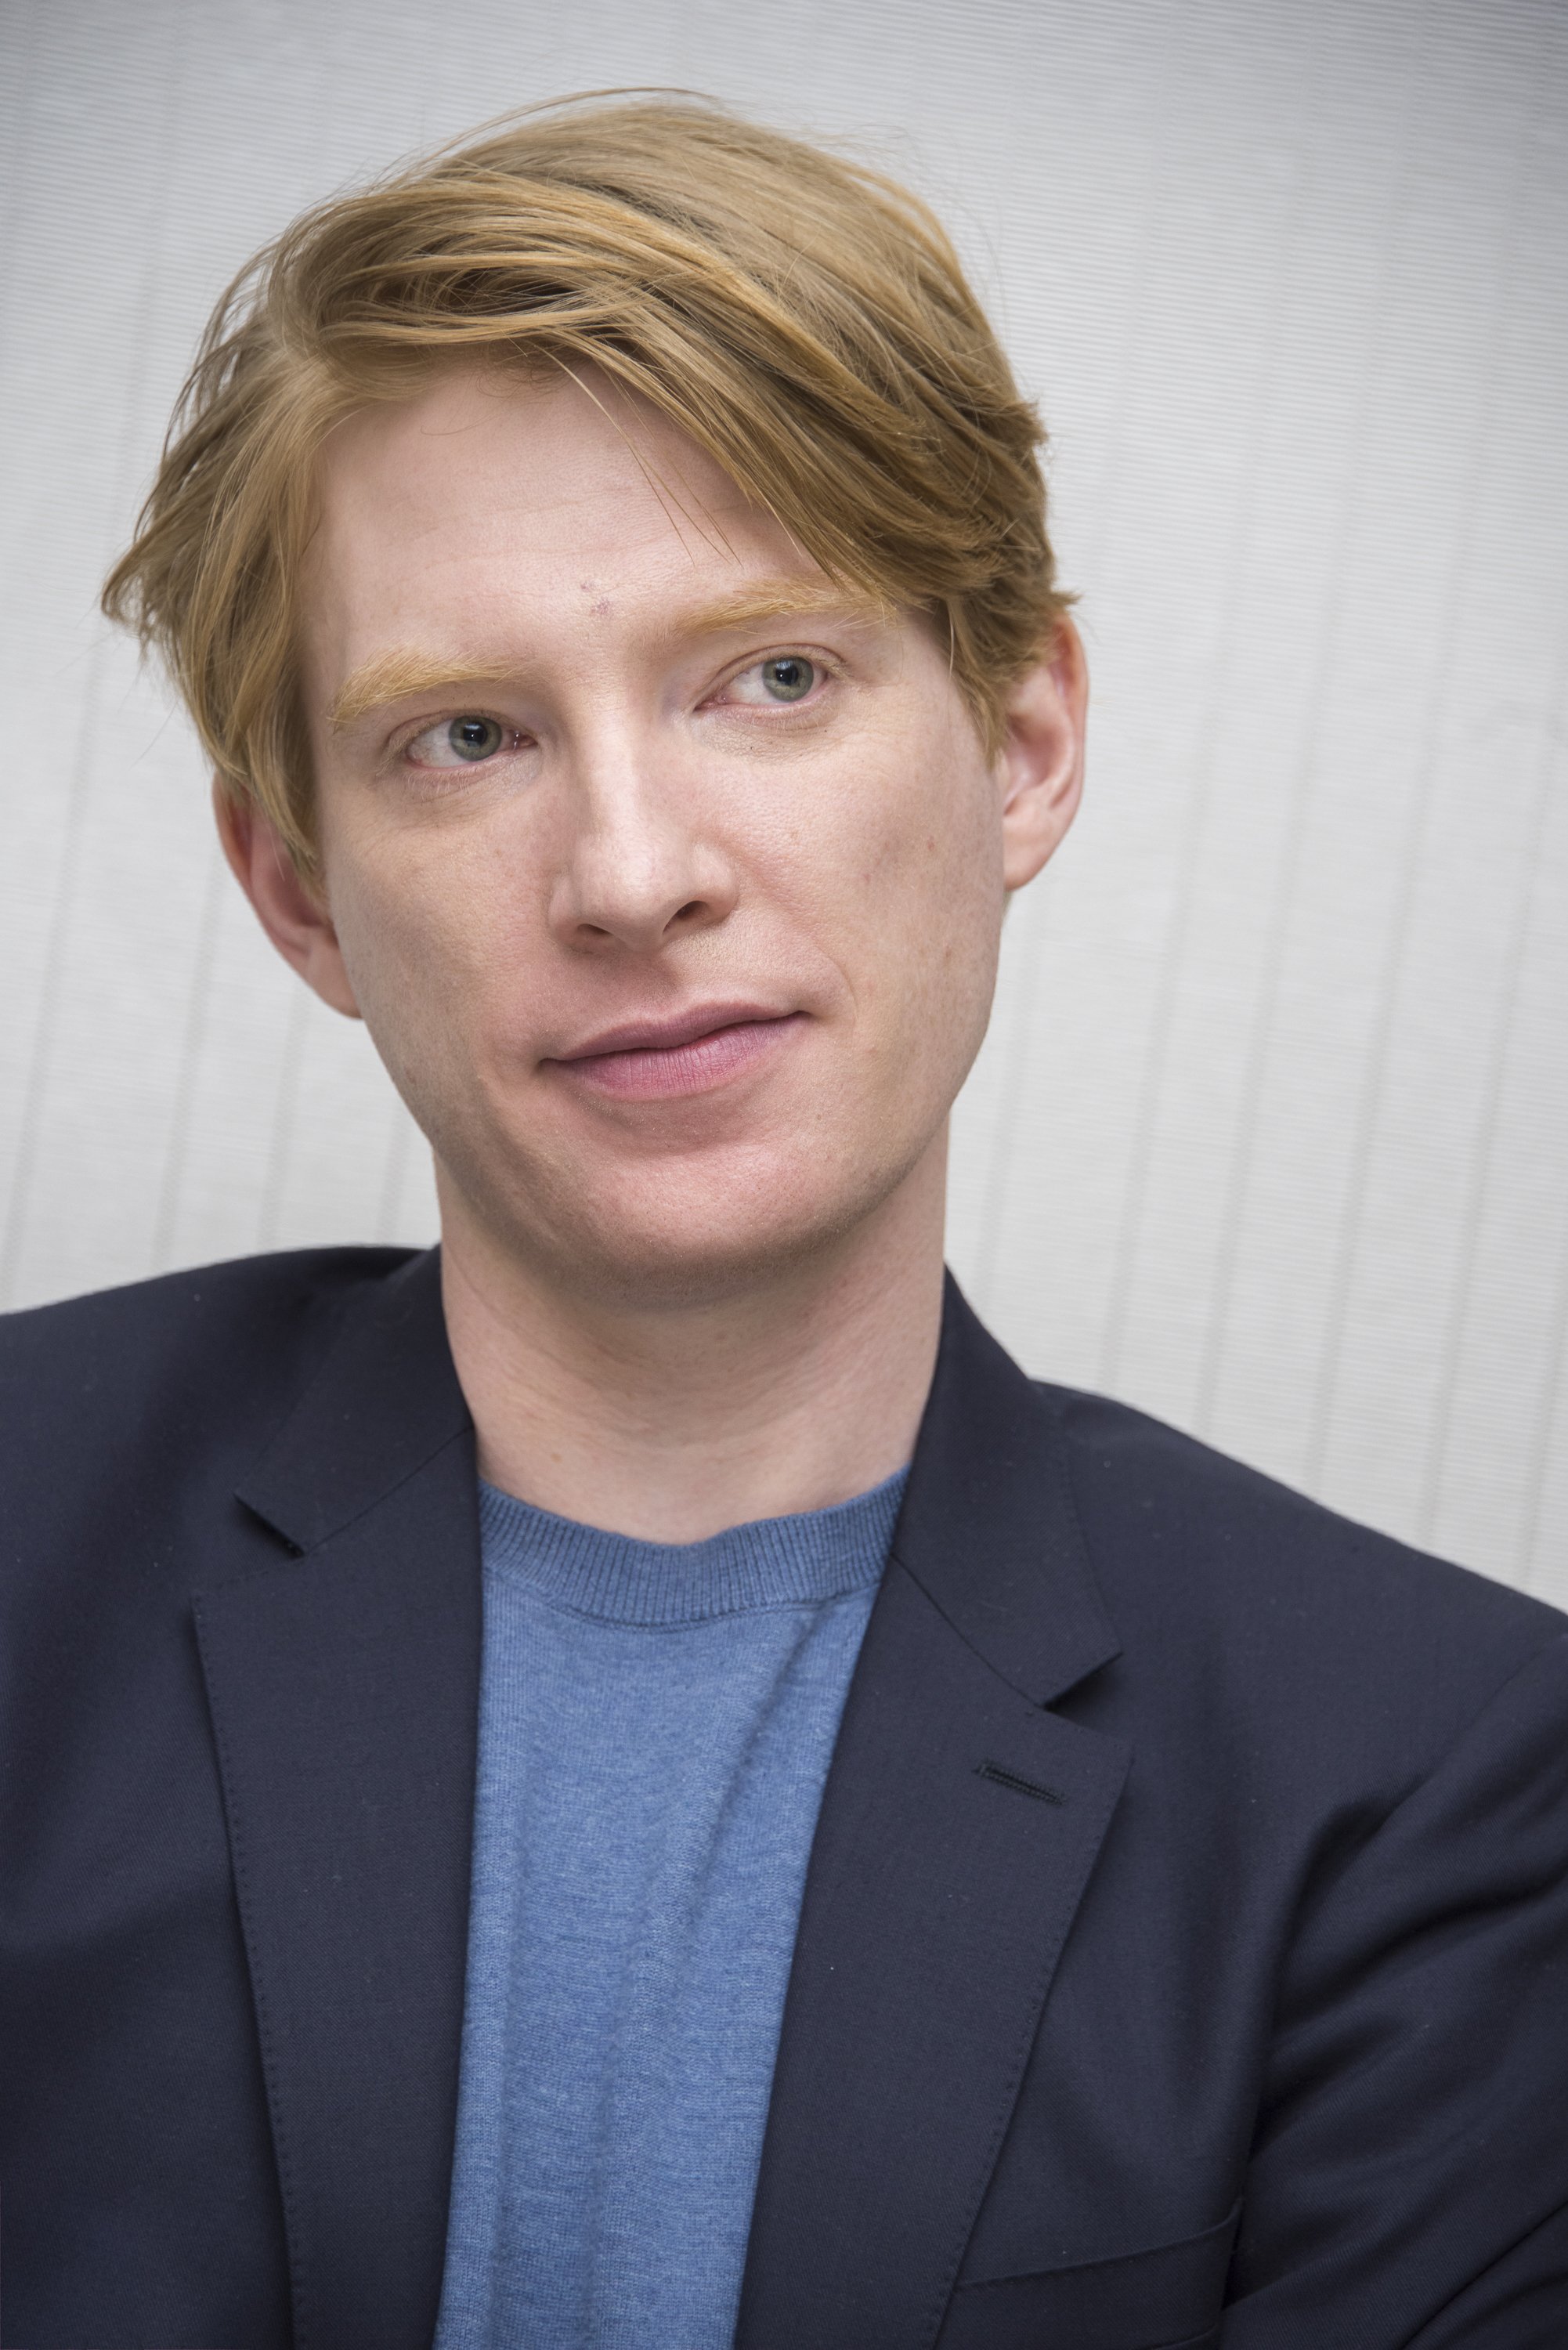 Domhnall Gleeson at the press conference for "Peter Rabbit" on February 2, 2018, in West Hollywood | Source: Getty Images